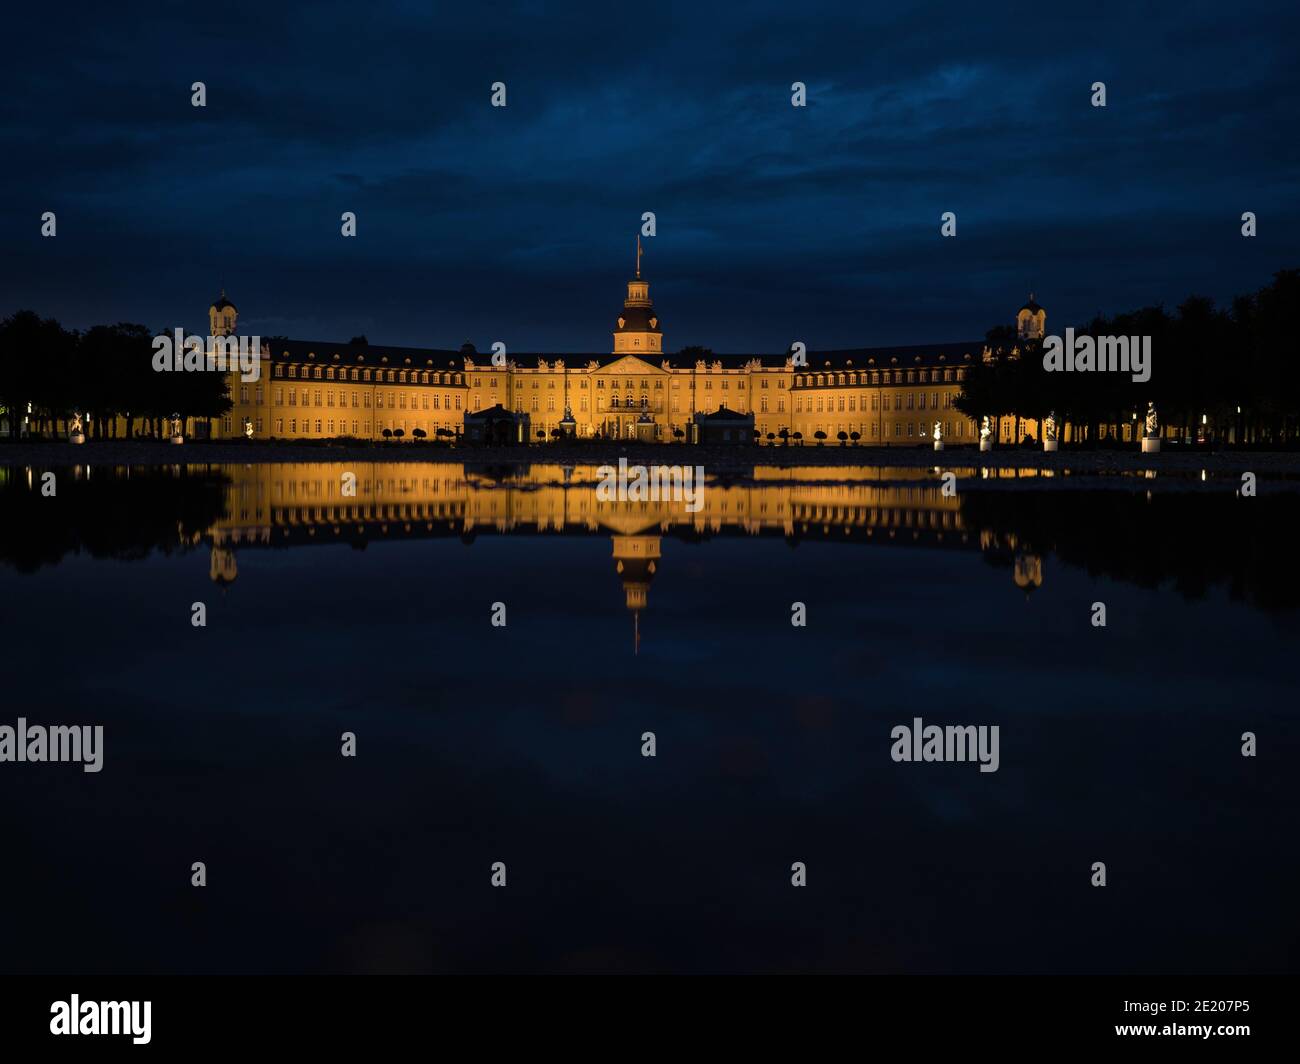 Panorama night reflection of illuminated yellow stone Schloss Karlsruhe Castle Palace Schlosspark in Baden Wurttemberg Germany in Europe Stock Photo